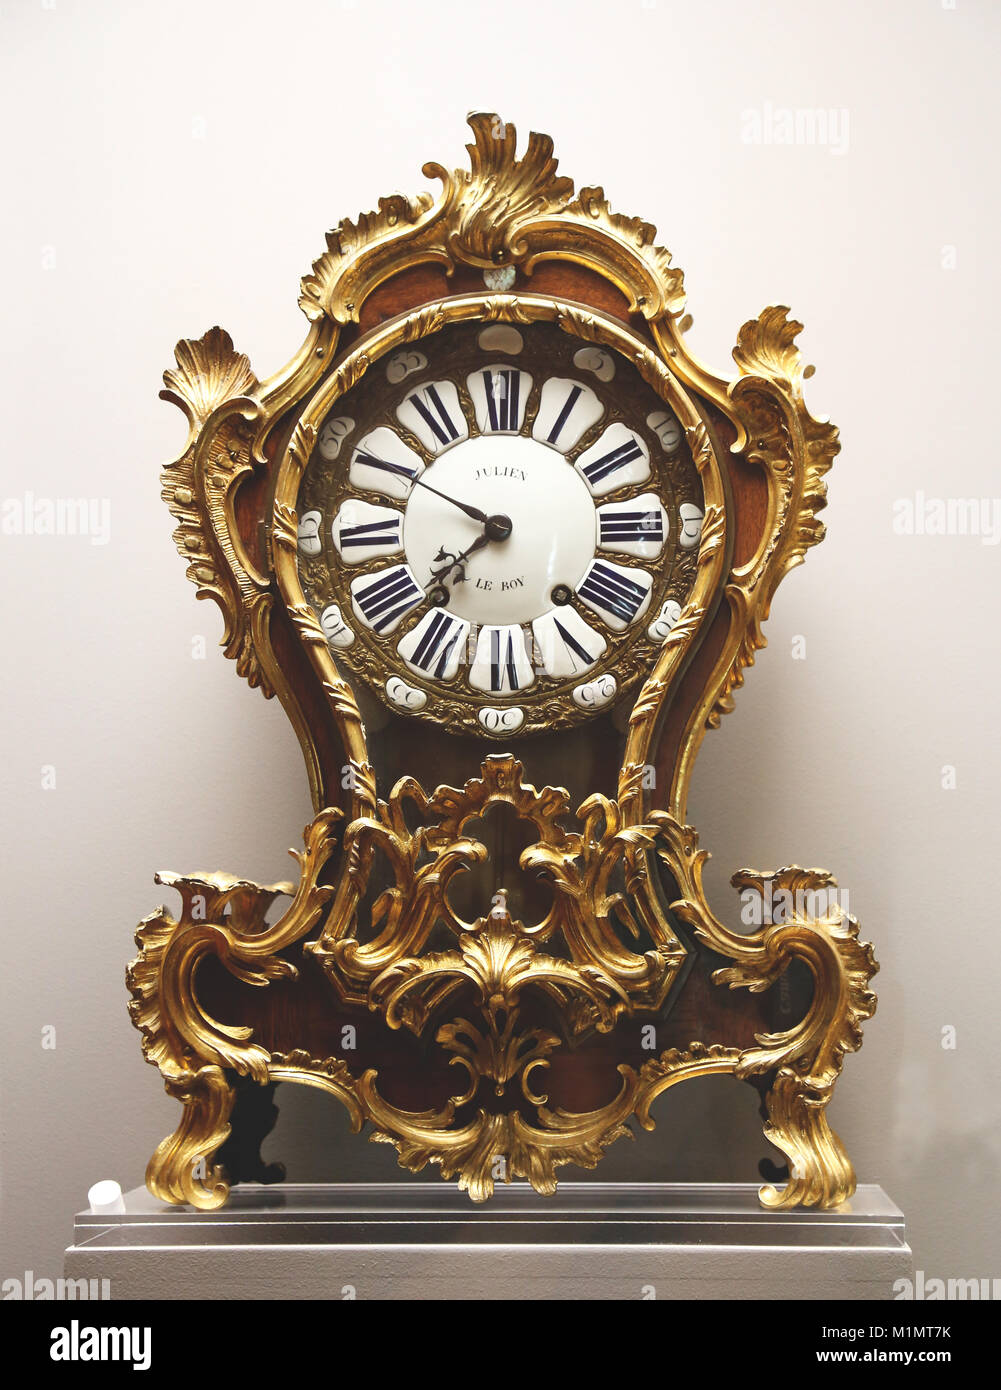 Bracket clock by Julien le Roy, master 1713, case by Antoine Foullet, master 1747. 18th. century Stock Photo